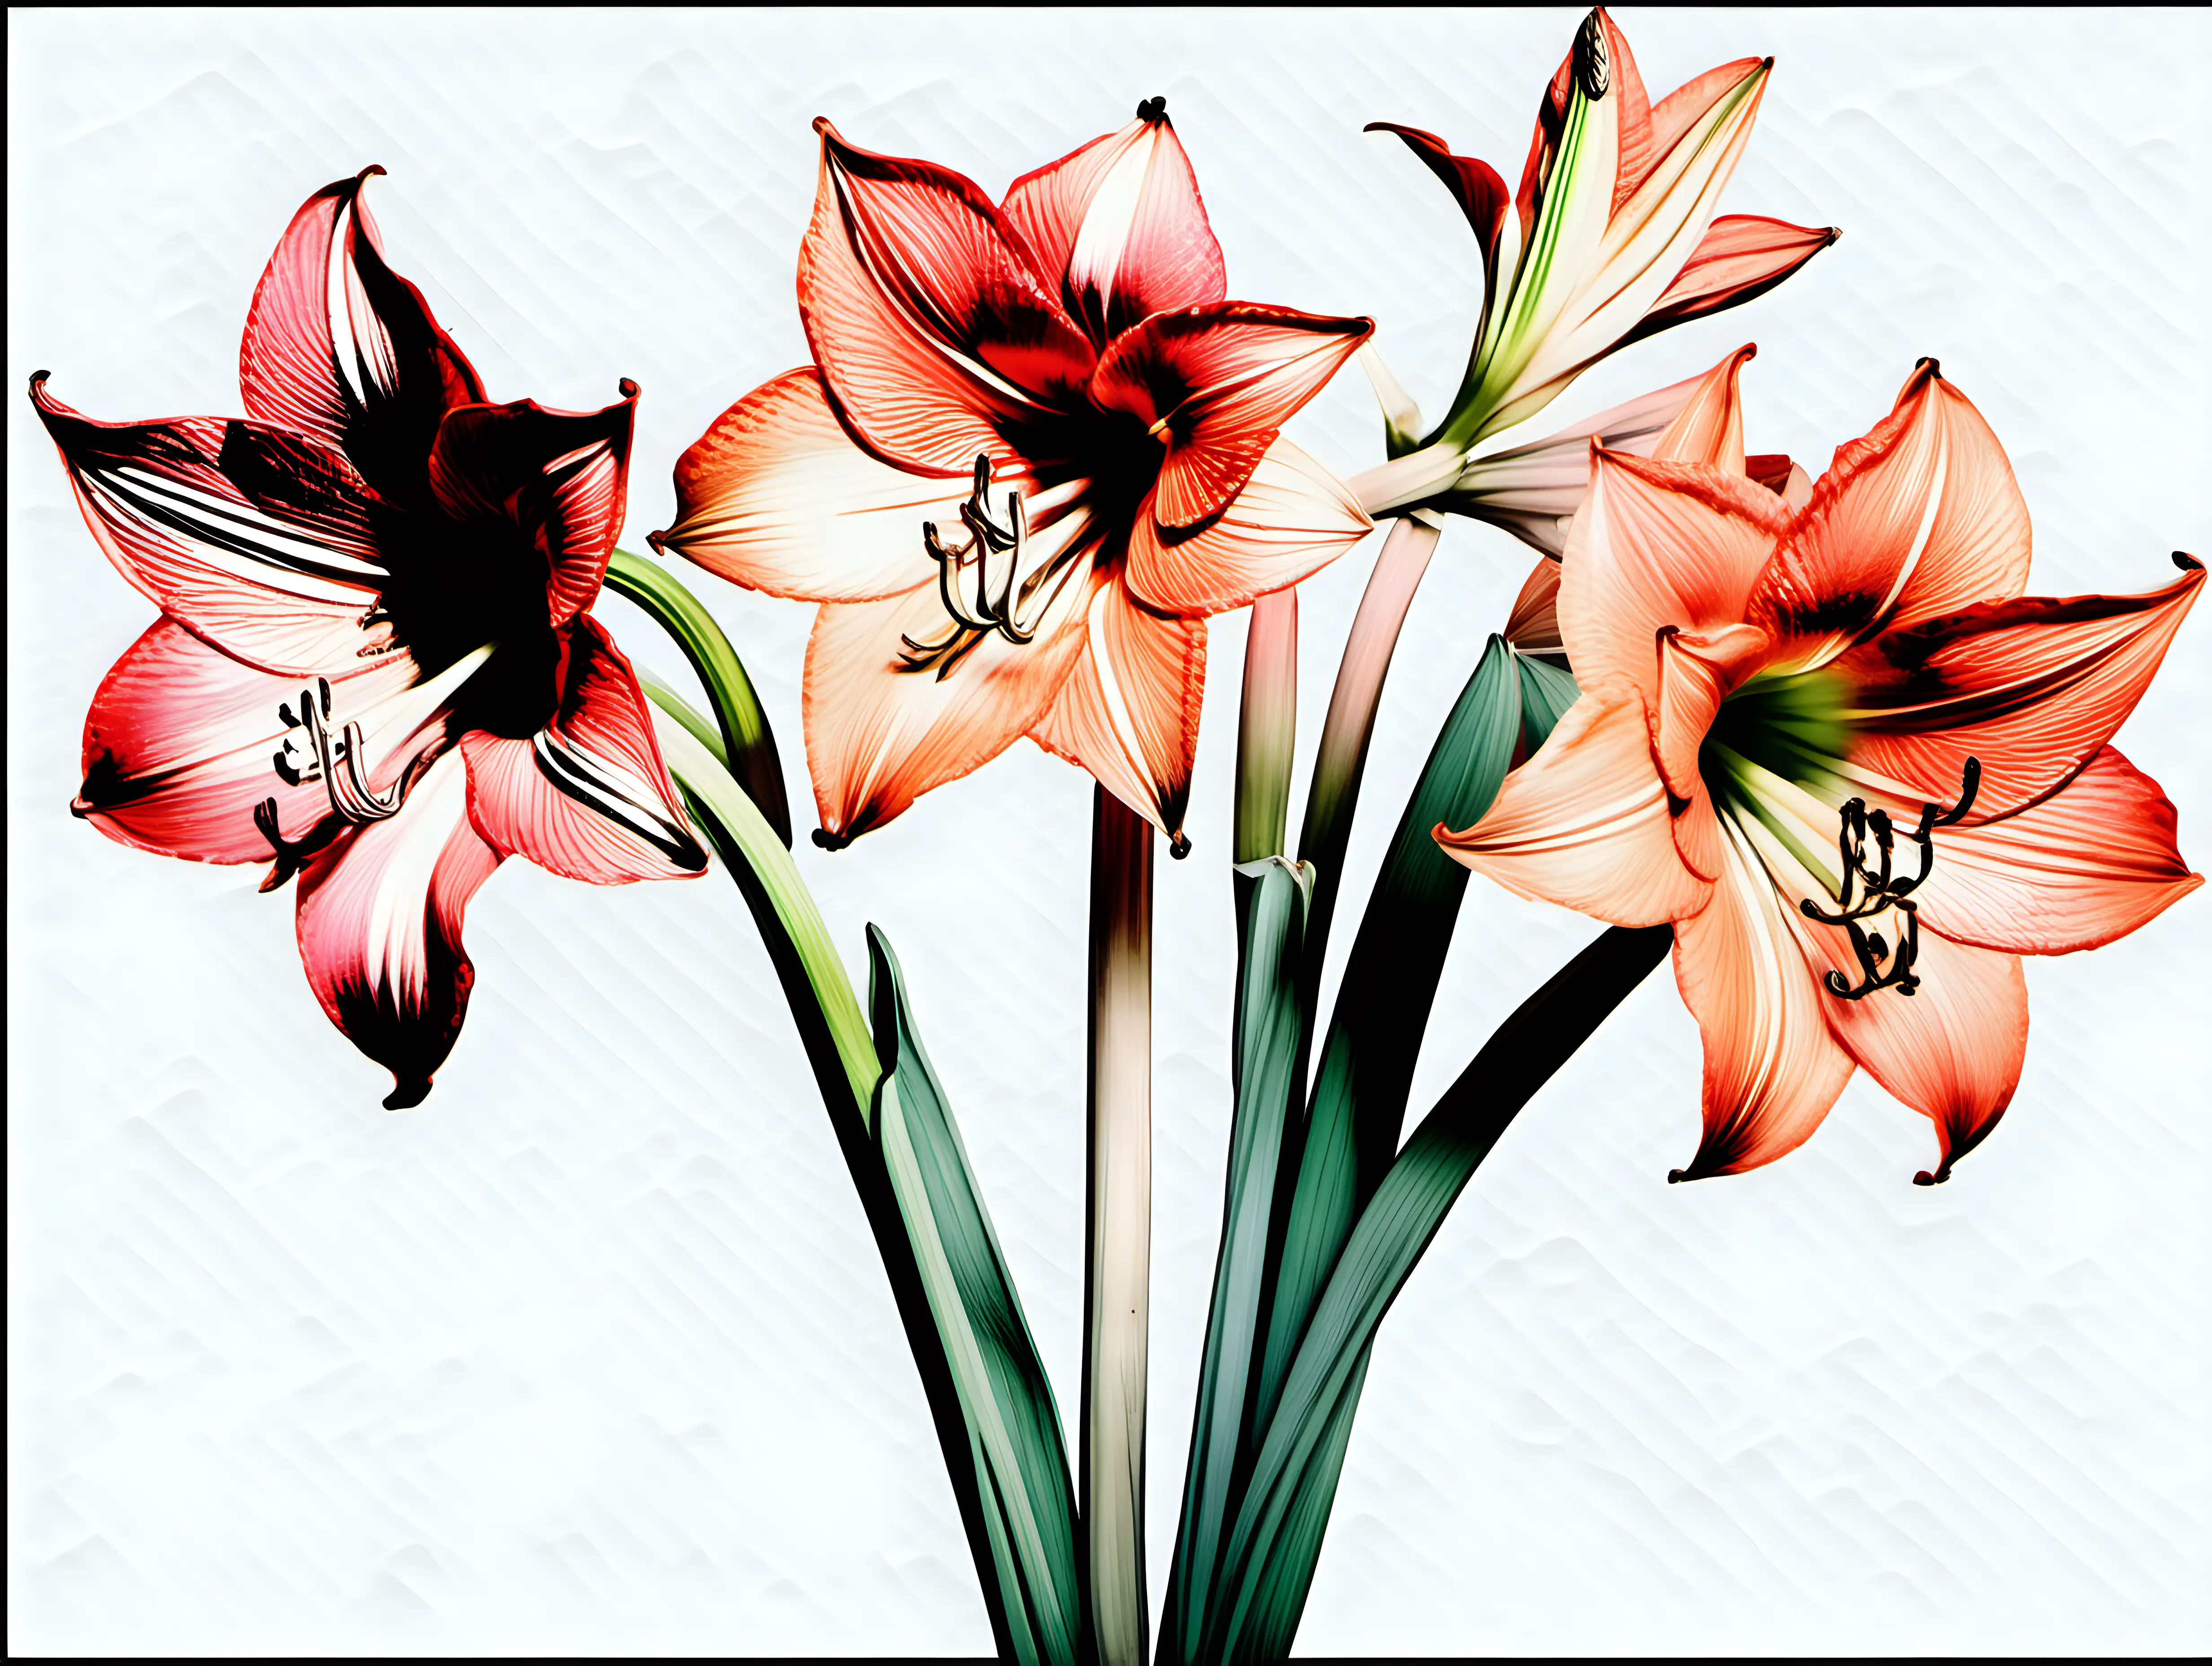 Pastel Watercolor Amaryllis Flowers Clipart on White Background Andy Warhol Inspired Tile